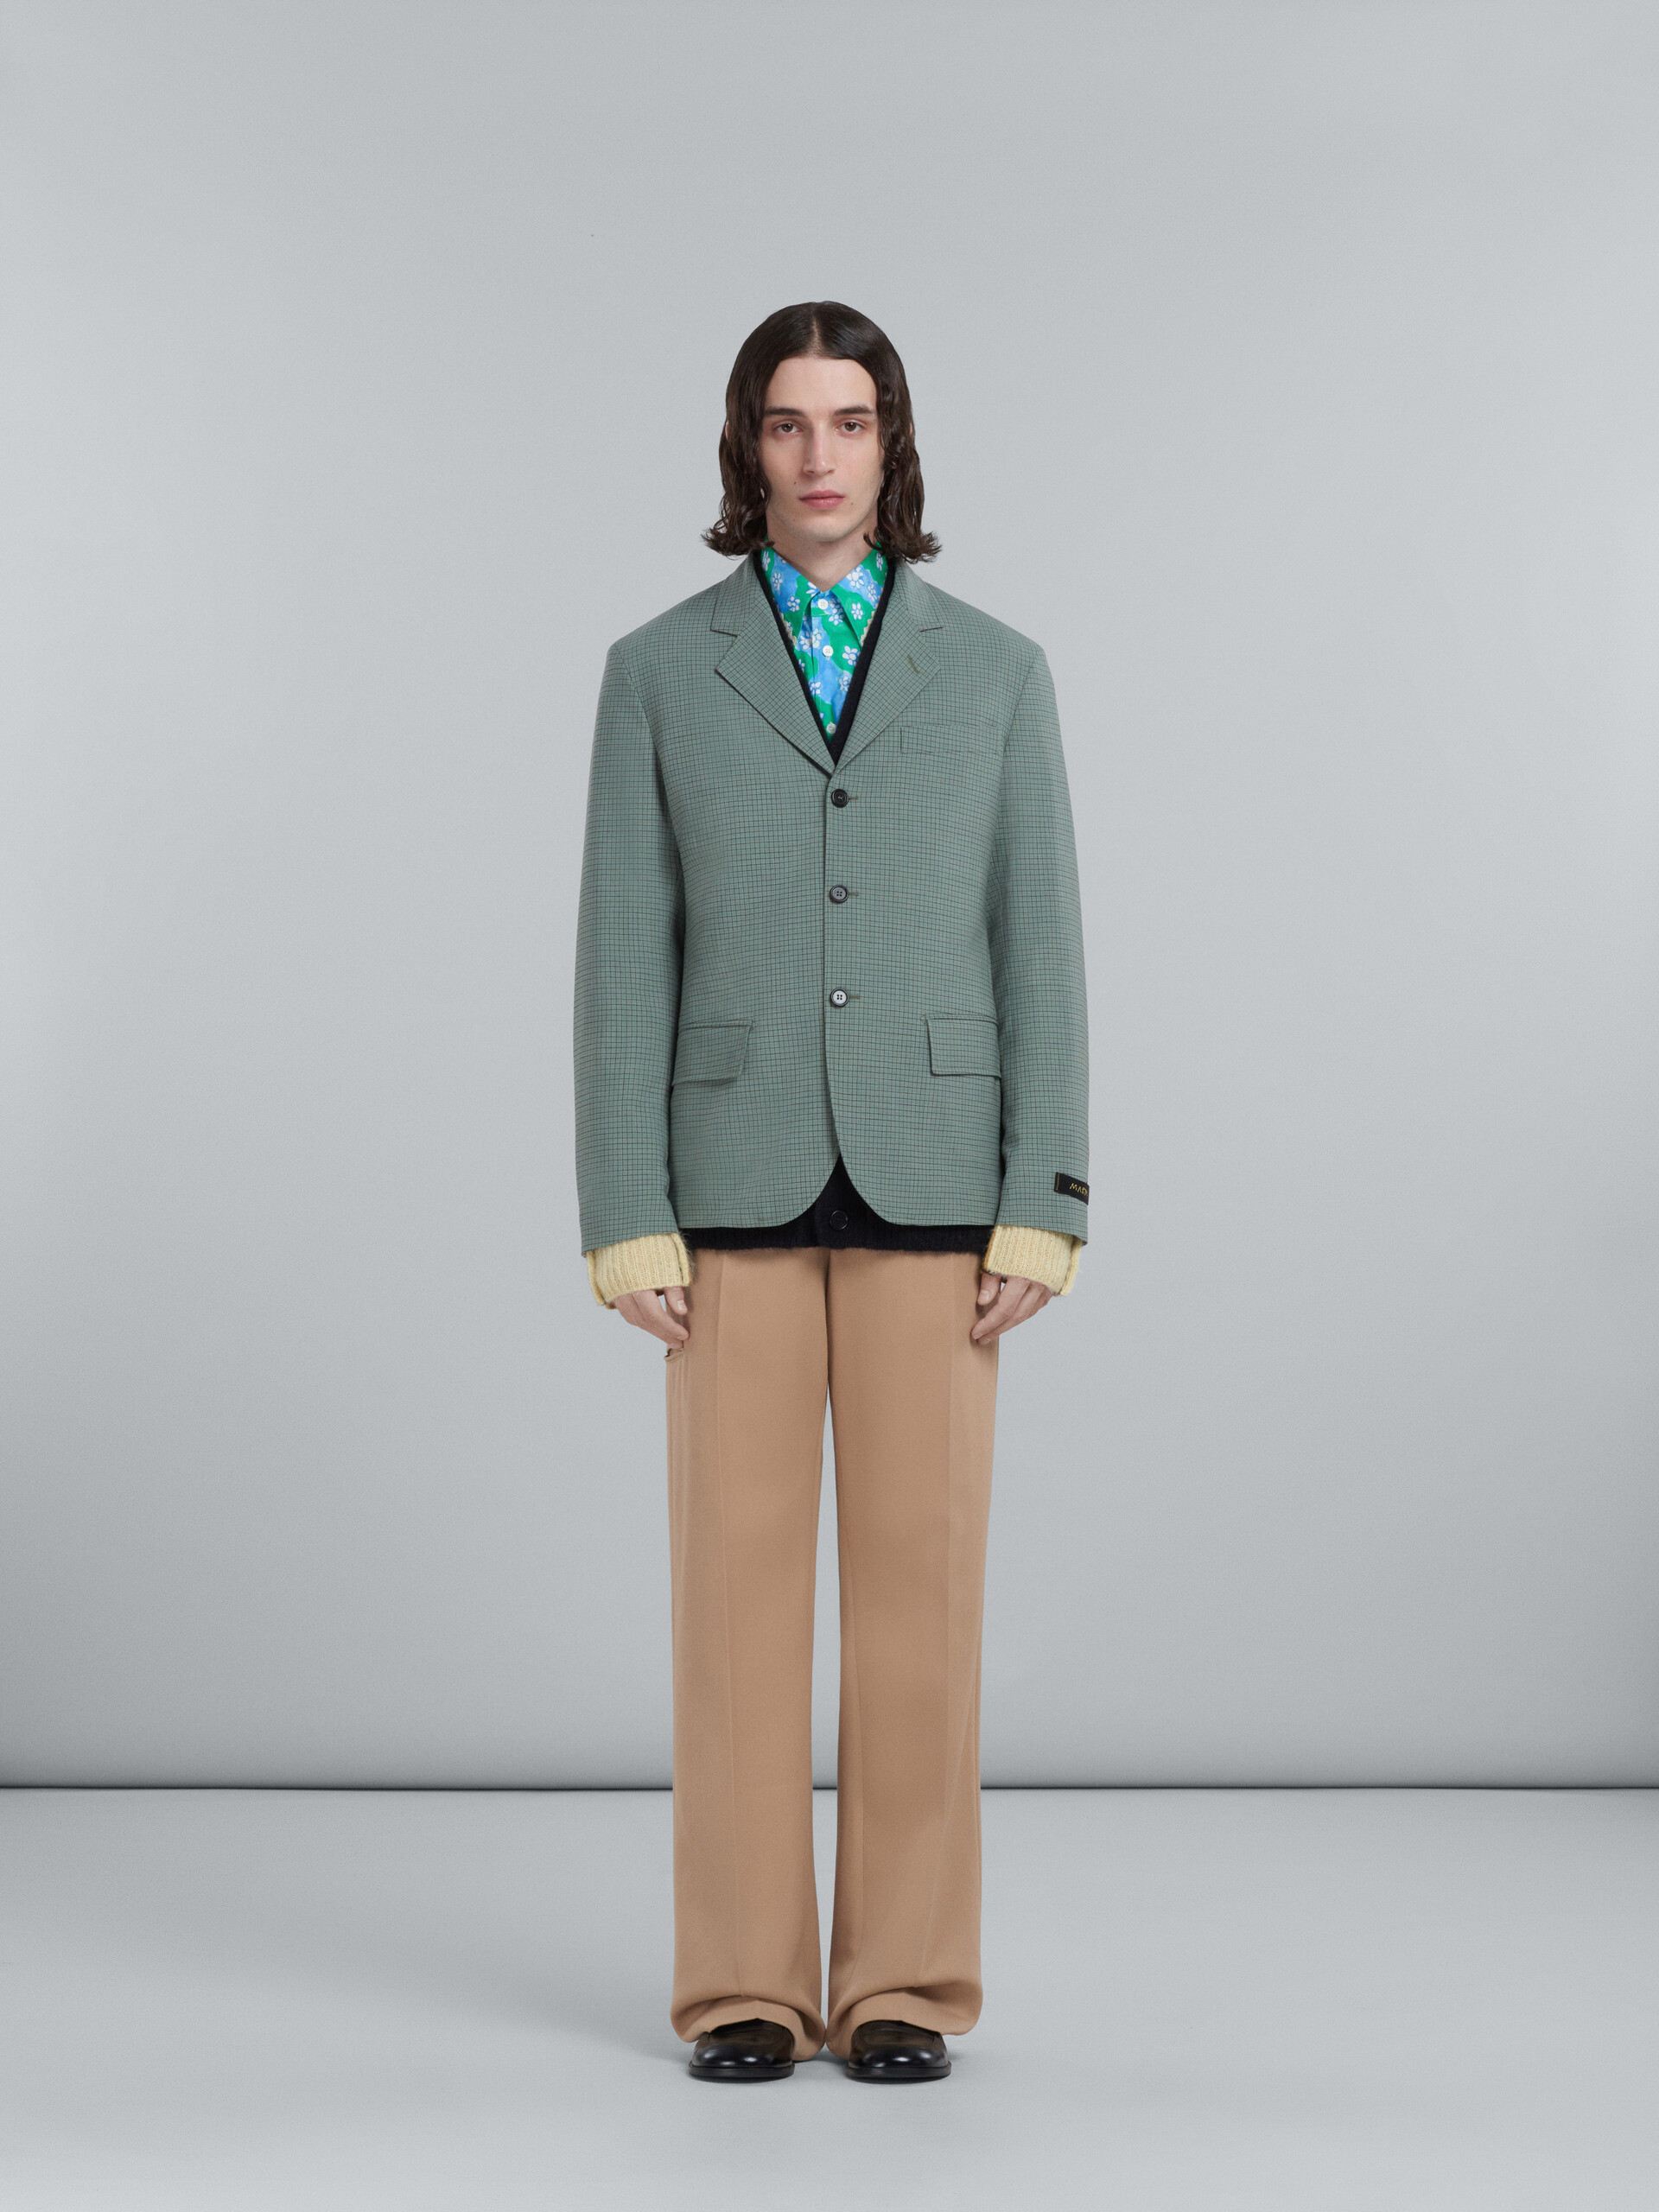 Blazer in tropical wool with green checks - Jackets - Image 2